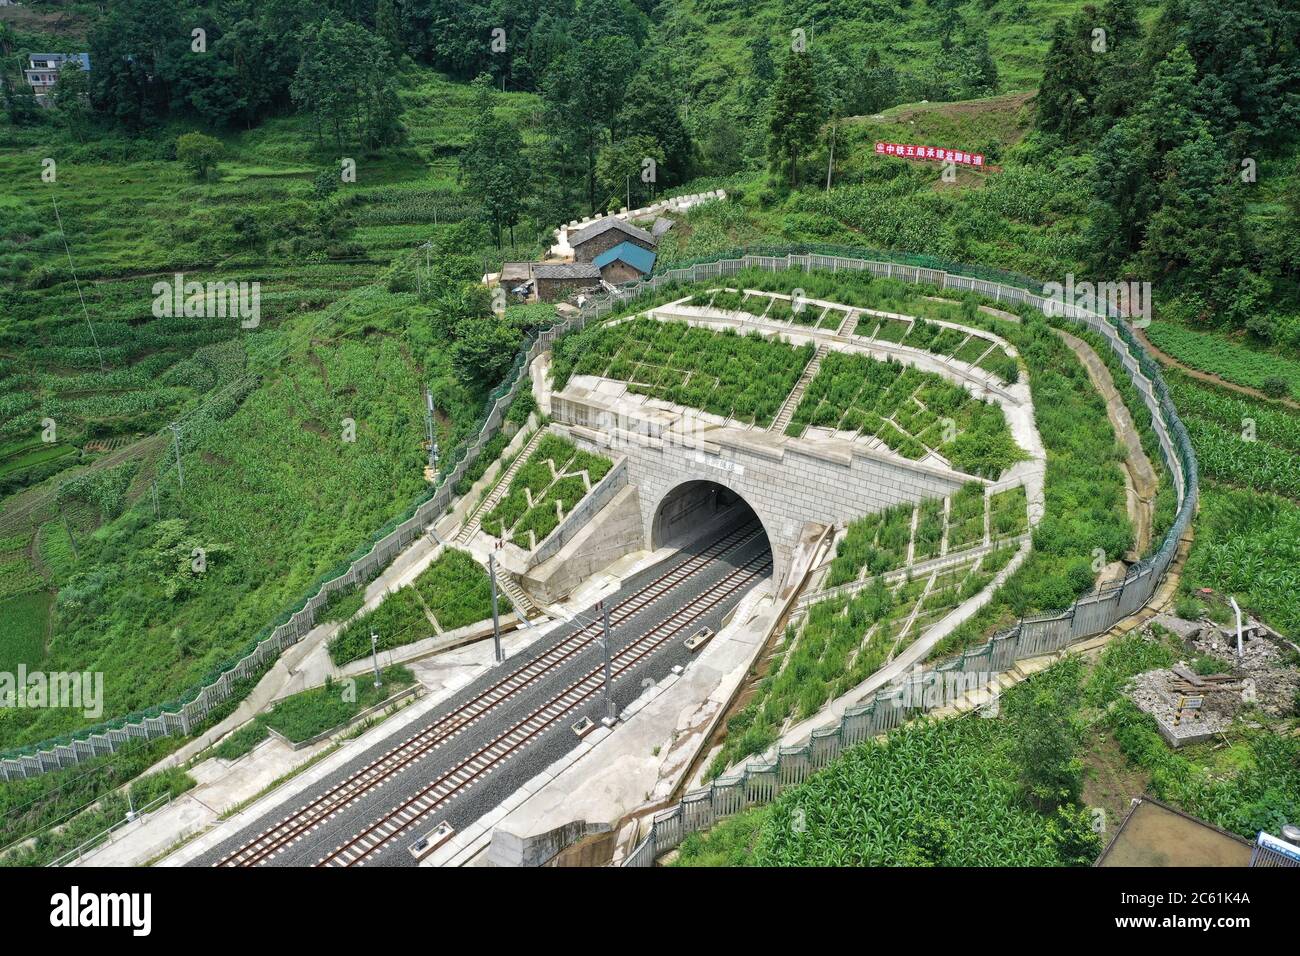 Liupanshui. 6th July, 2020. Aerial photo taken on July 6, 2020 shows a railway tunnel along the Anshun-Liupanshui railway in southwest China's Guizhou Province. The Anshun-Liupanshui intercity railway, with a designed speed of 250 km per hour, is being prepared for opening. The railway will shorten the travel time between Guiyang and Liupanshui from the current 3.5 hours to about 1 hour, and Liupanshui City will be fully connected with the national high-speed rail network. Credit: Liu Xu/Xinhua/Alamy Live News Stock Photo